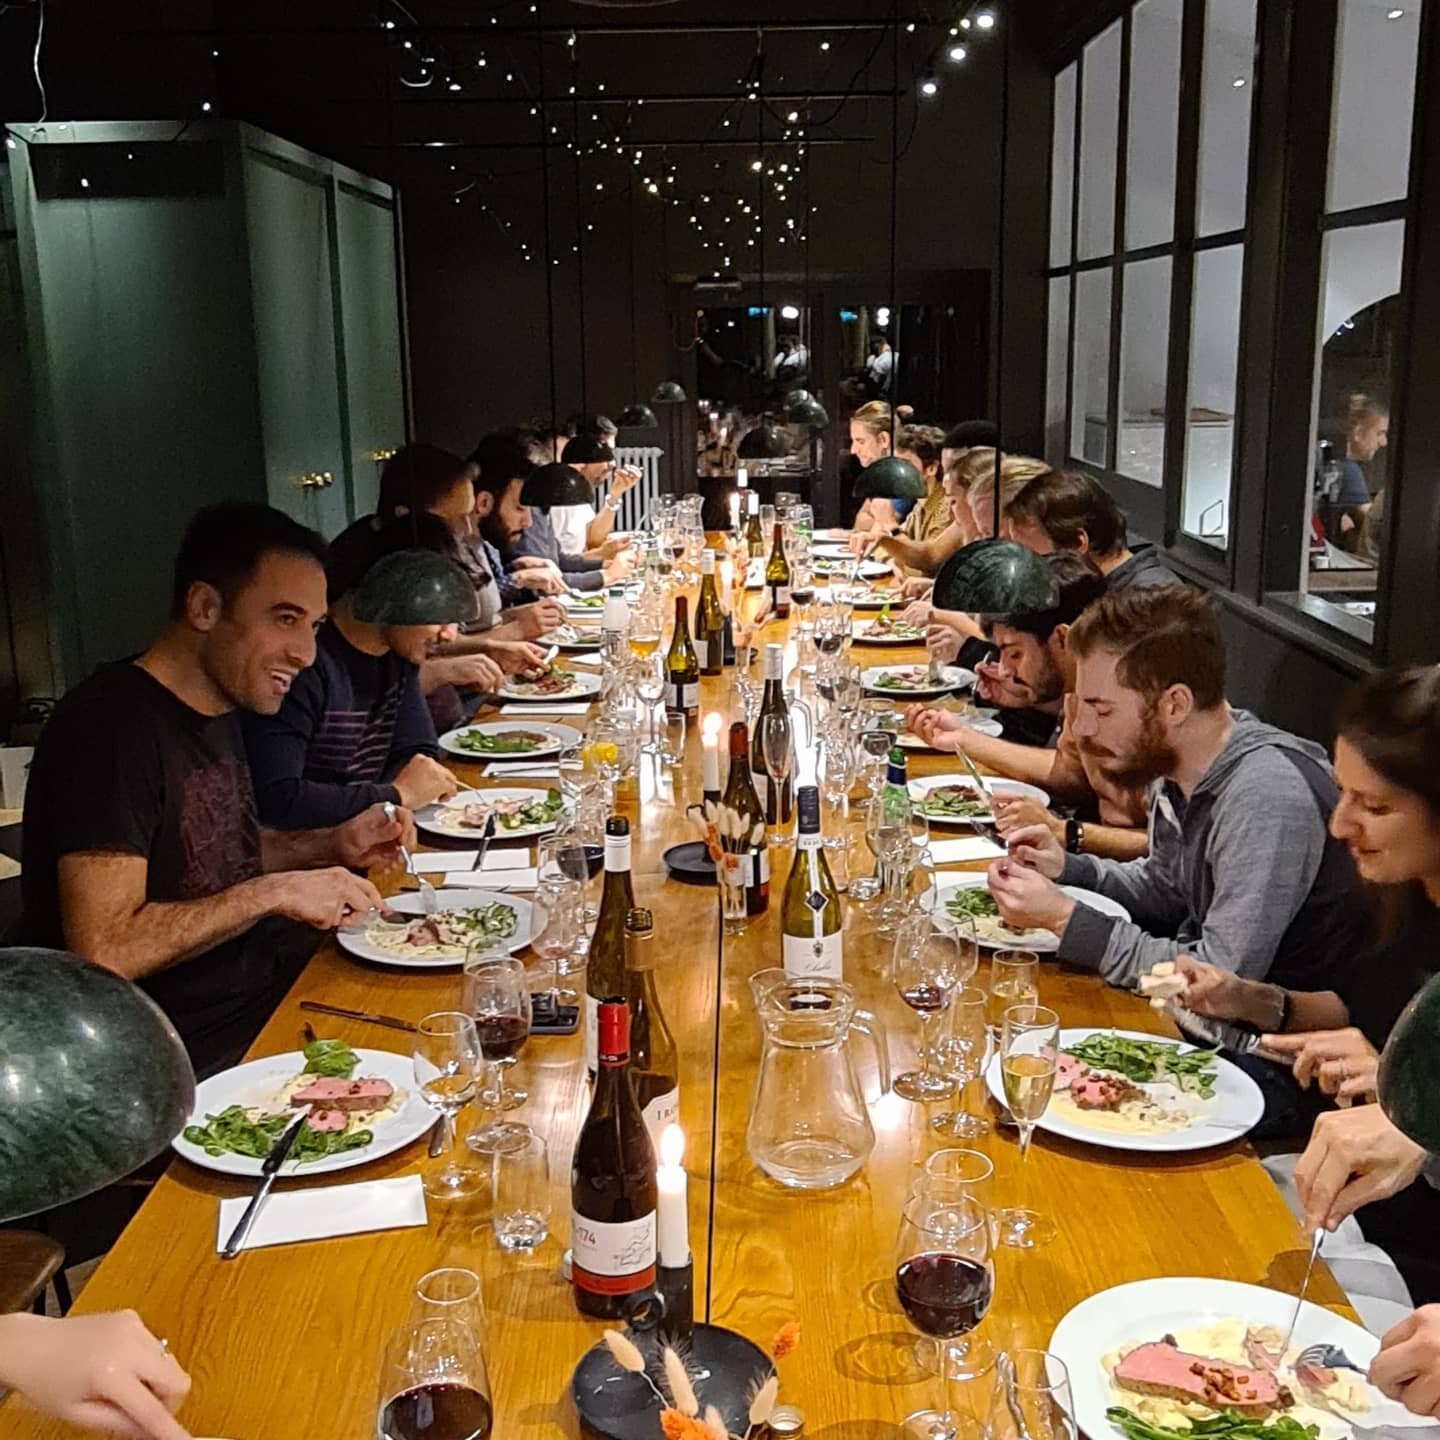 What a great night we had cooking at Cajsa Warg! Fantastic work everyone! 🙌👩&zwj;🍳🧑&zwj;🍳🍾🍷